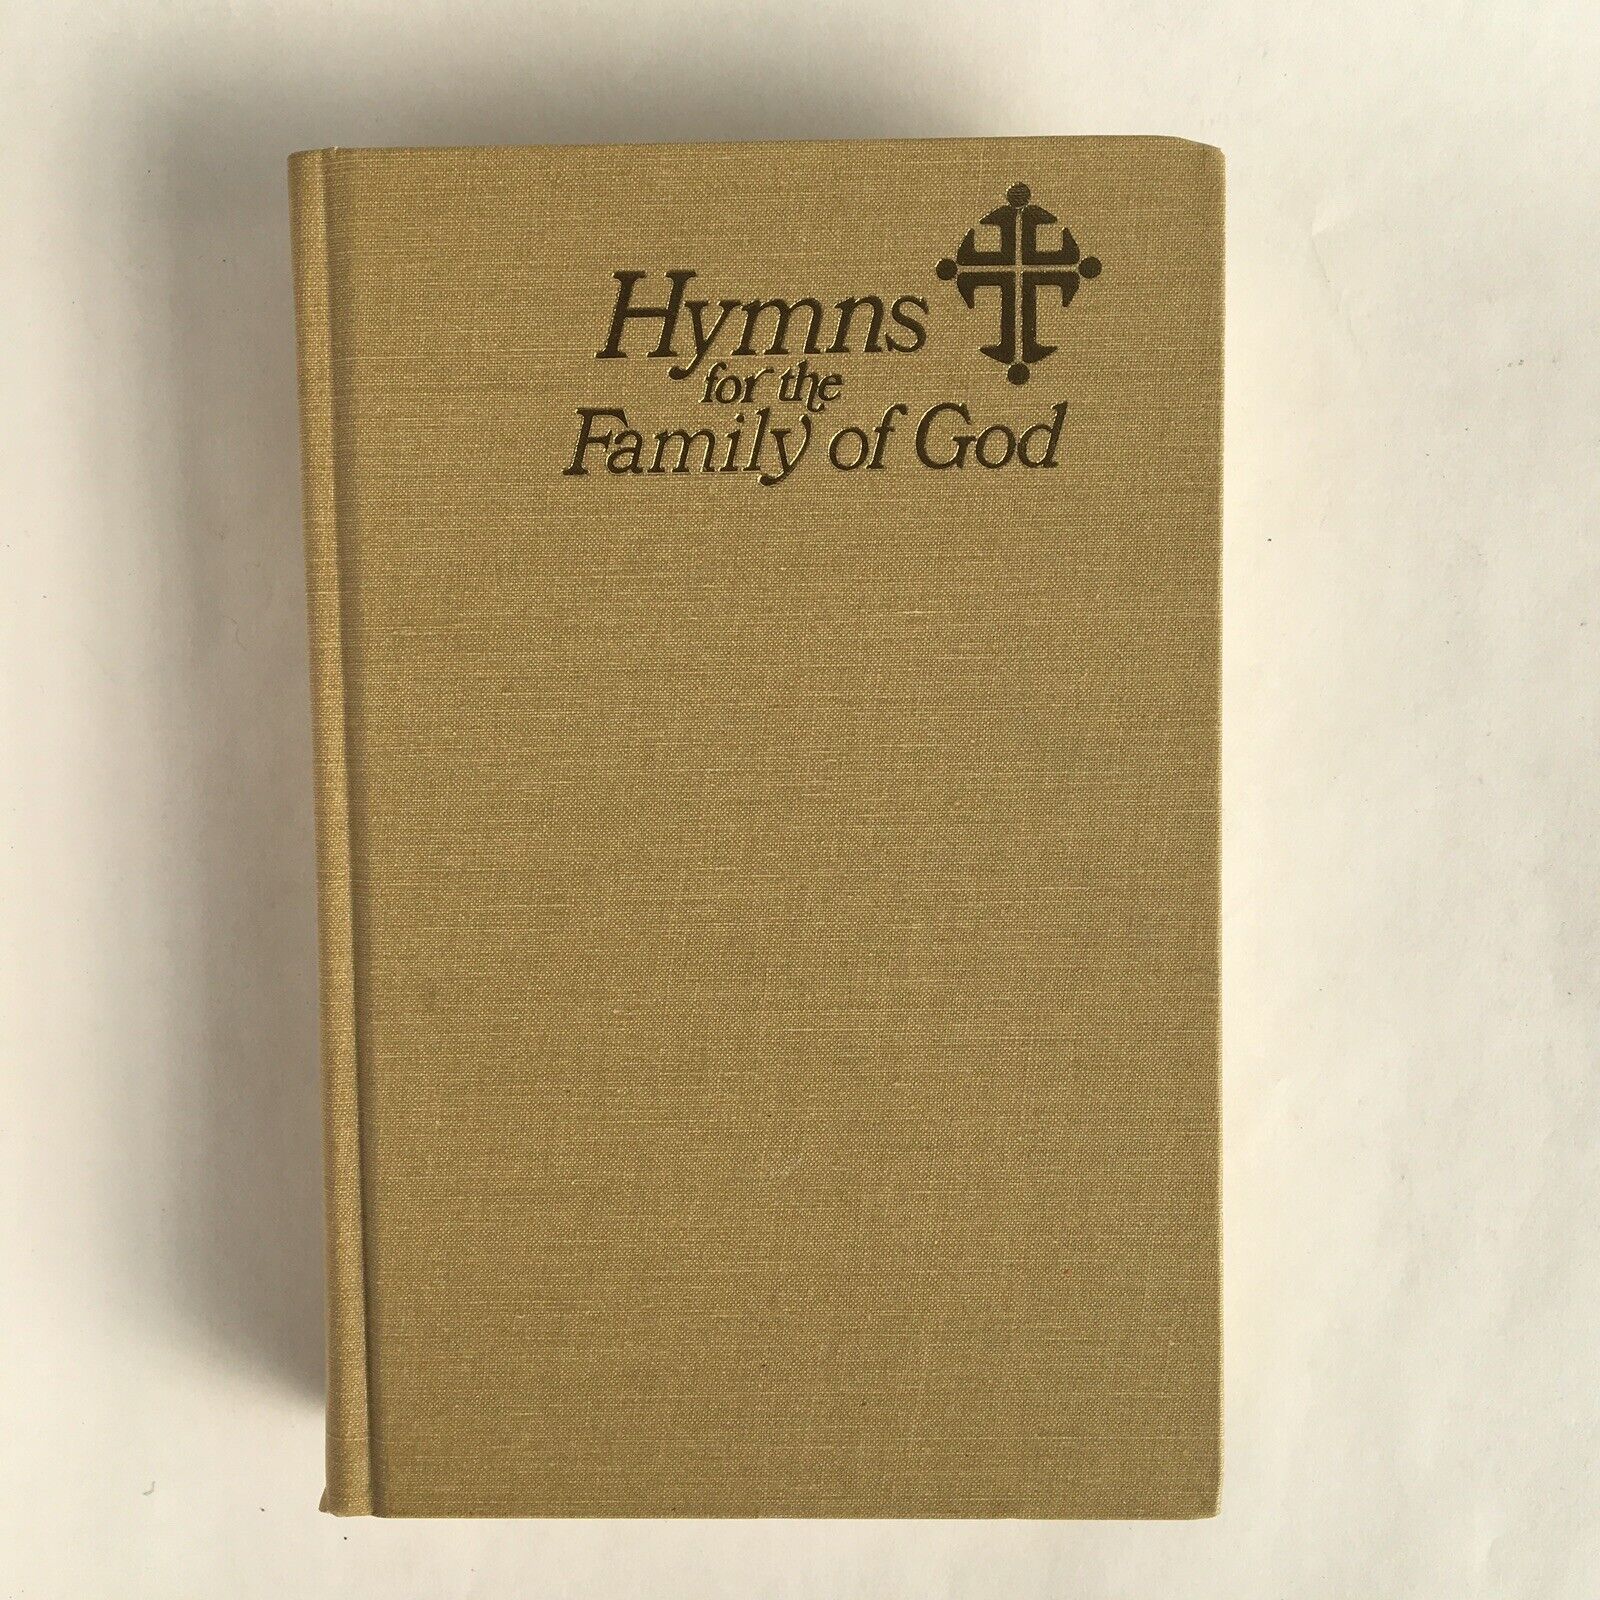 Hymns for the Family of God (Paragon 1976 Hardcover) Choir Sheet Music Vintage